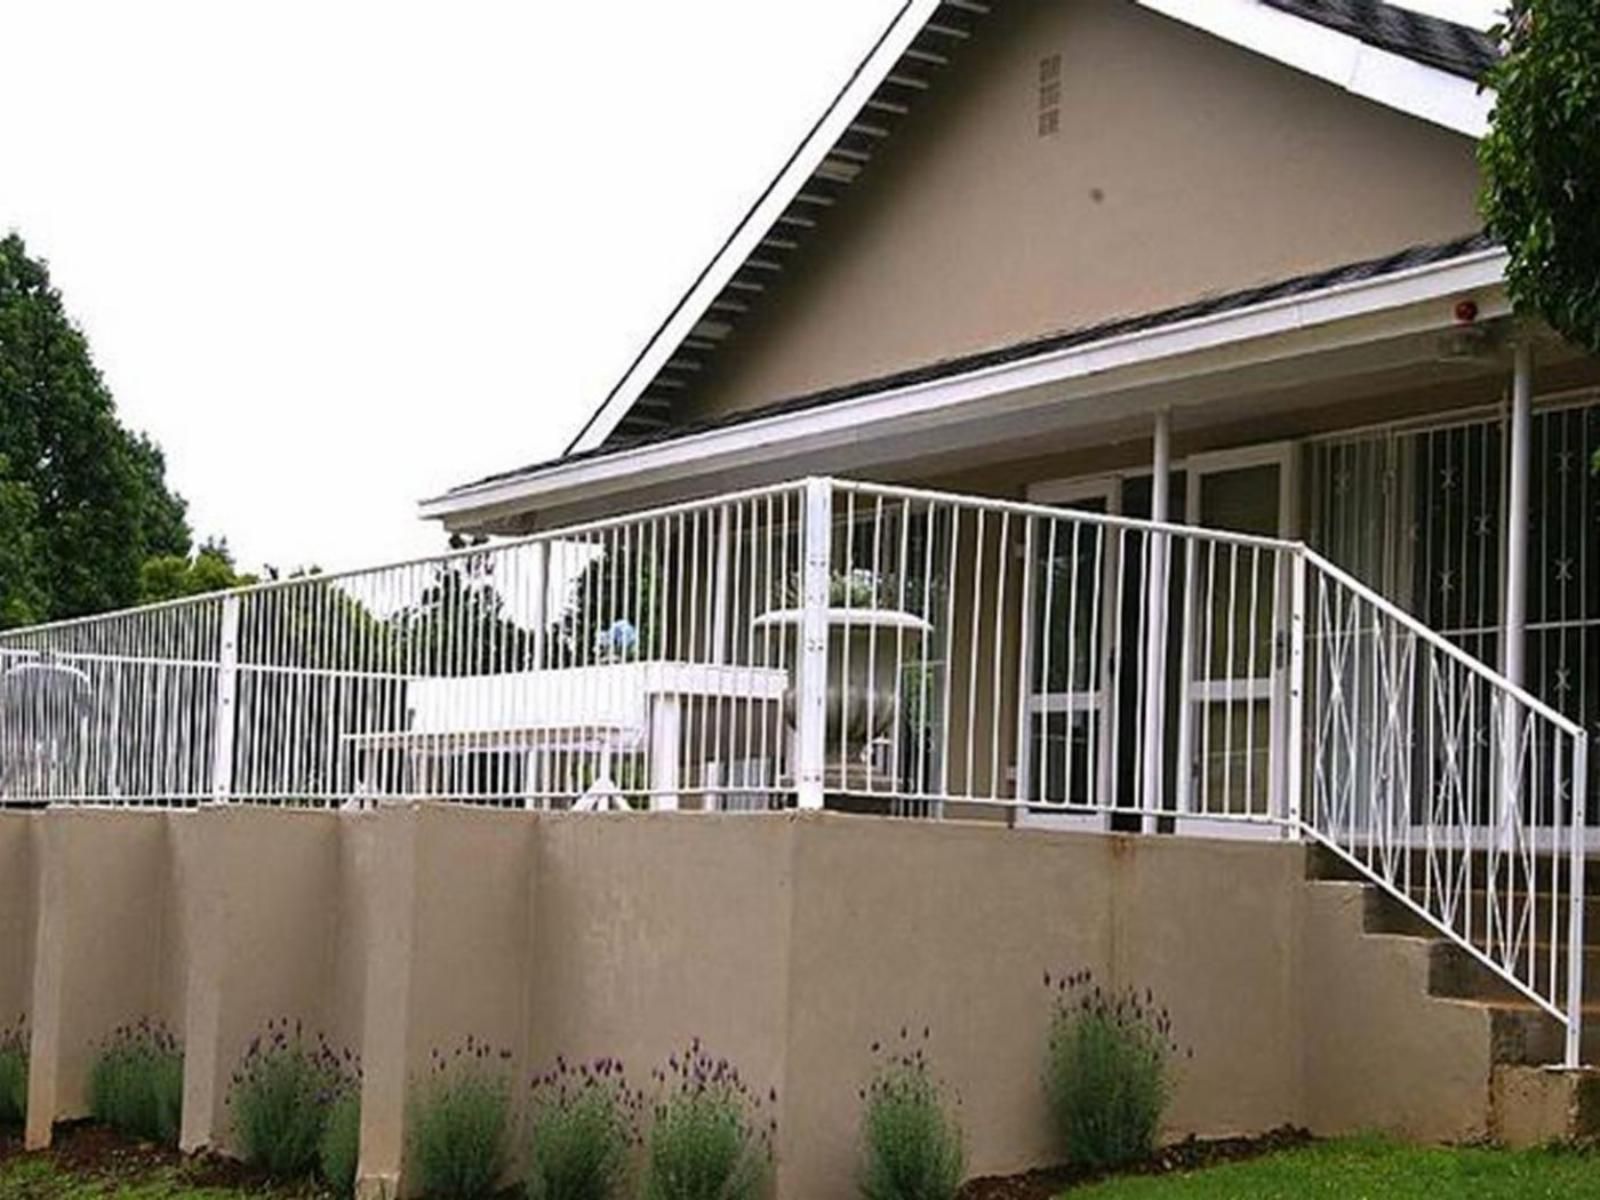 Farhills Guest House Champagne Valley Kwazulu Natal South Africa House, Building, Architecture